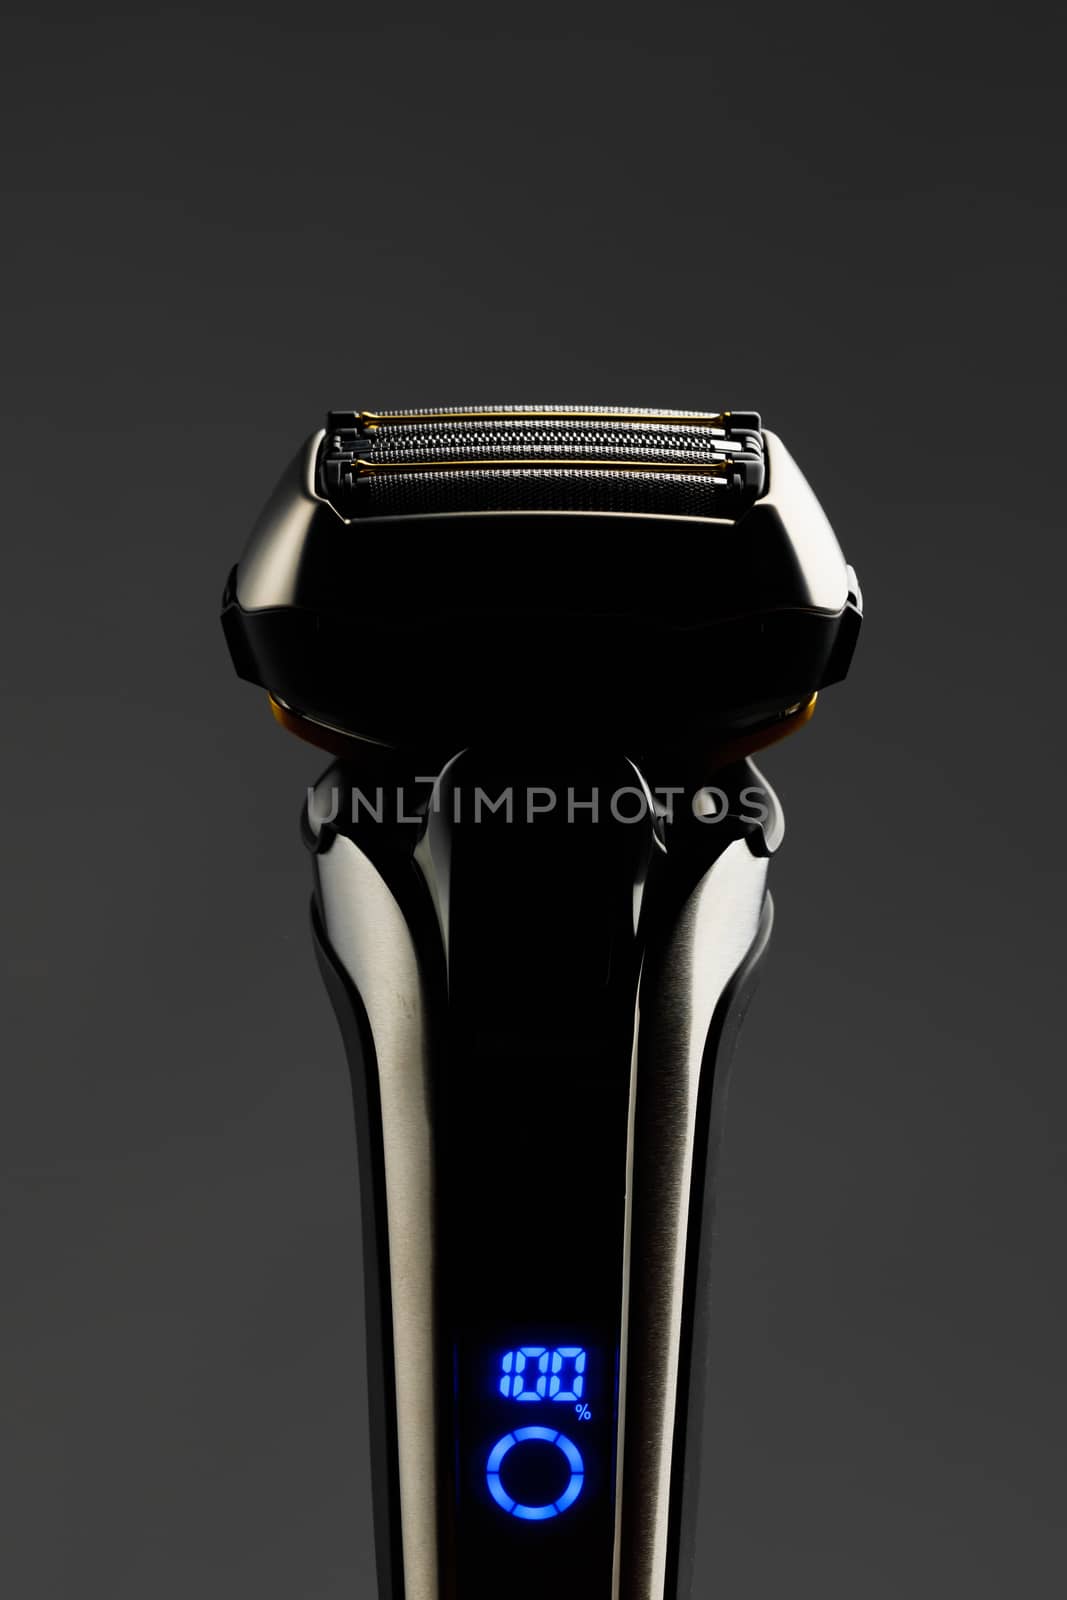 electric razor foil shaver mesh and blades, close-up view, gray background by nikkytok